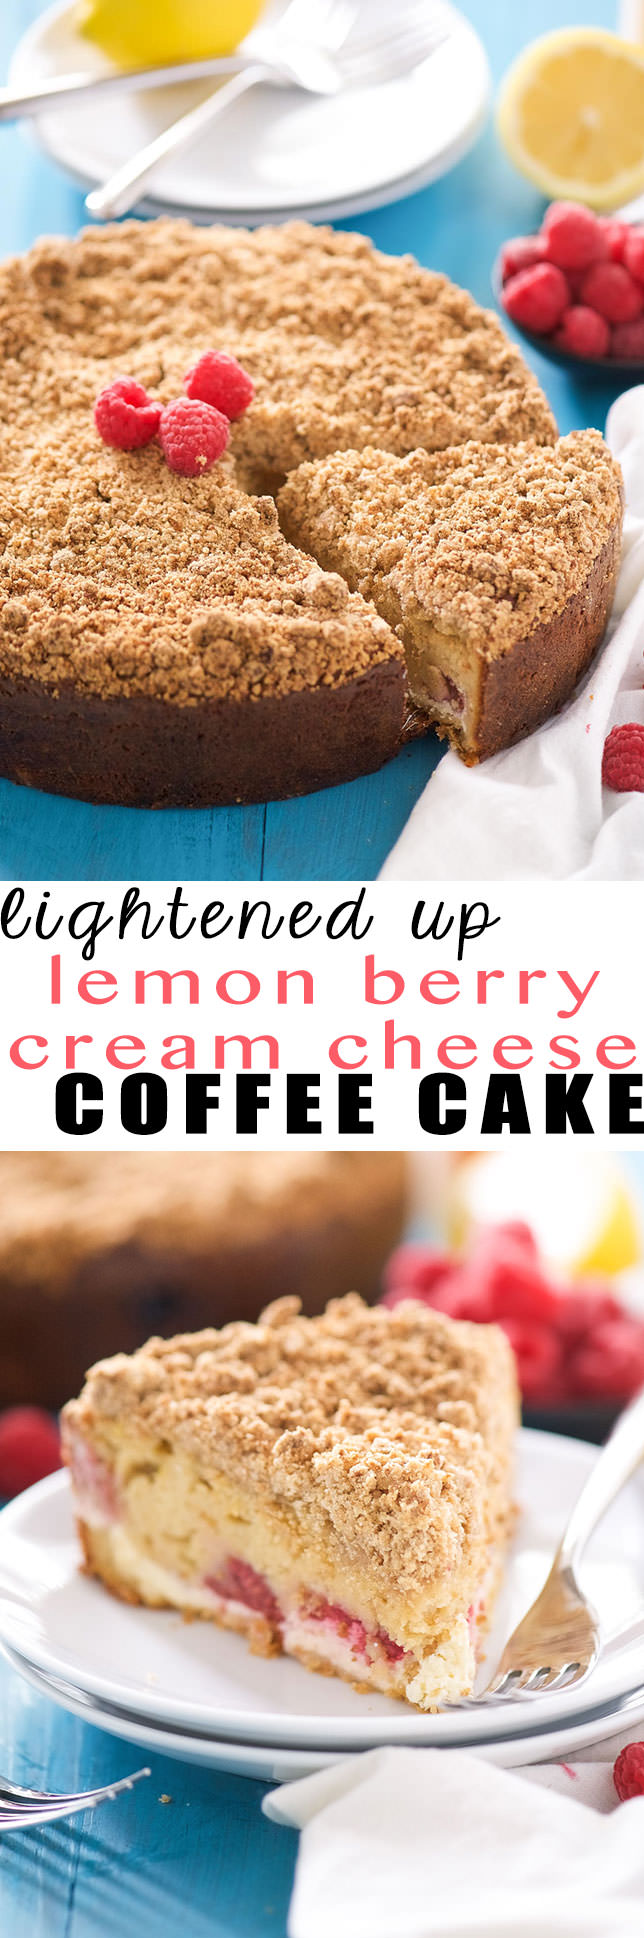 This Lemon Berry Cream Cheese Coffee Cake is the answer to your brunch prayers! A lightened up coffee cake that is bursting with spring flavors, filled with a creamy cream cheese swirl and a thick crumb layer!